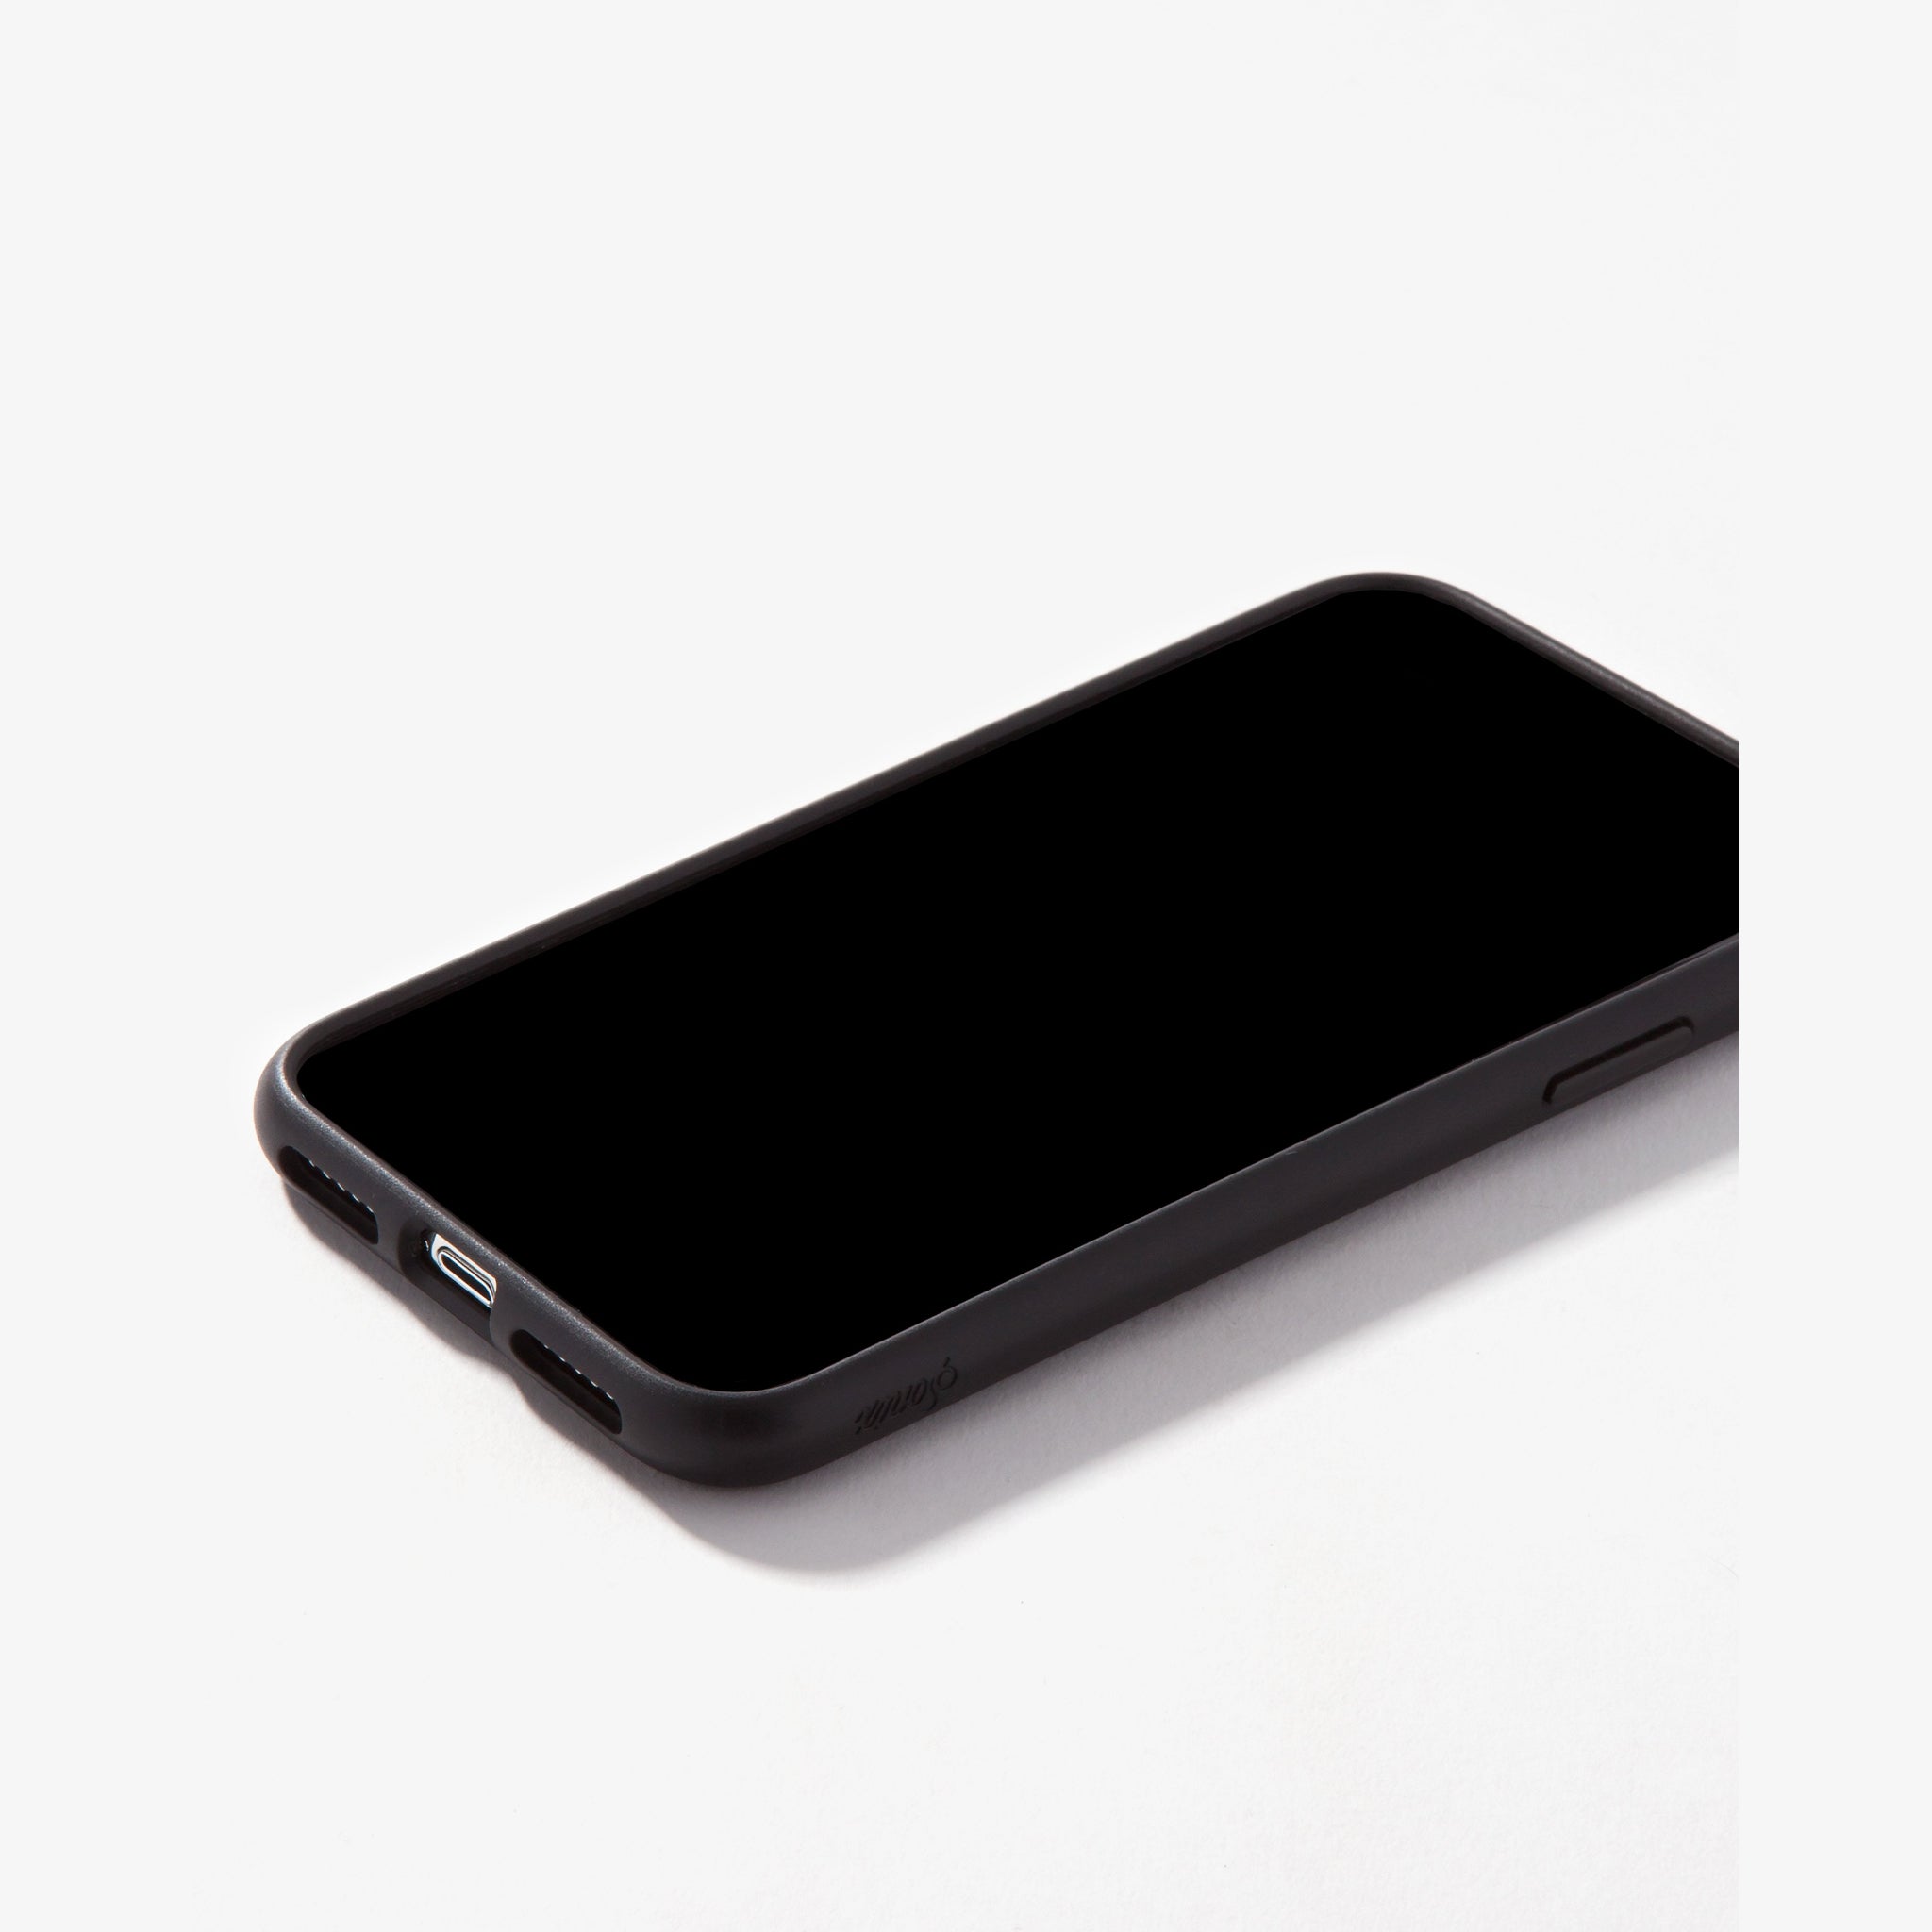 black case with white tort dice shown on an iphone 11 pro max front view